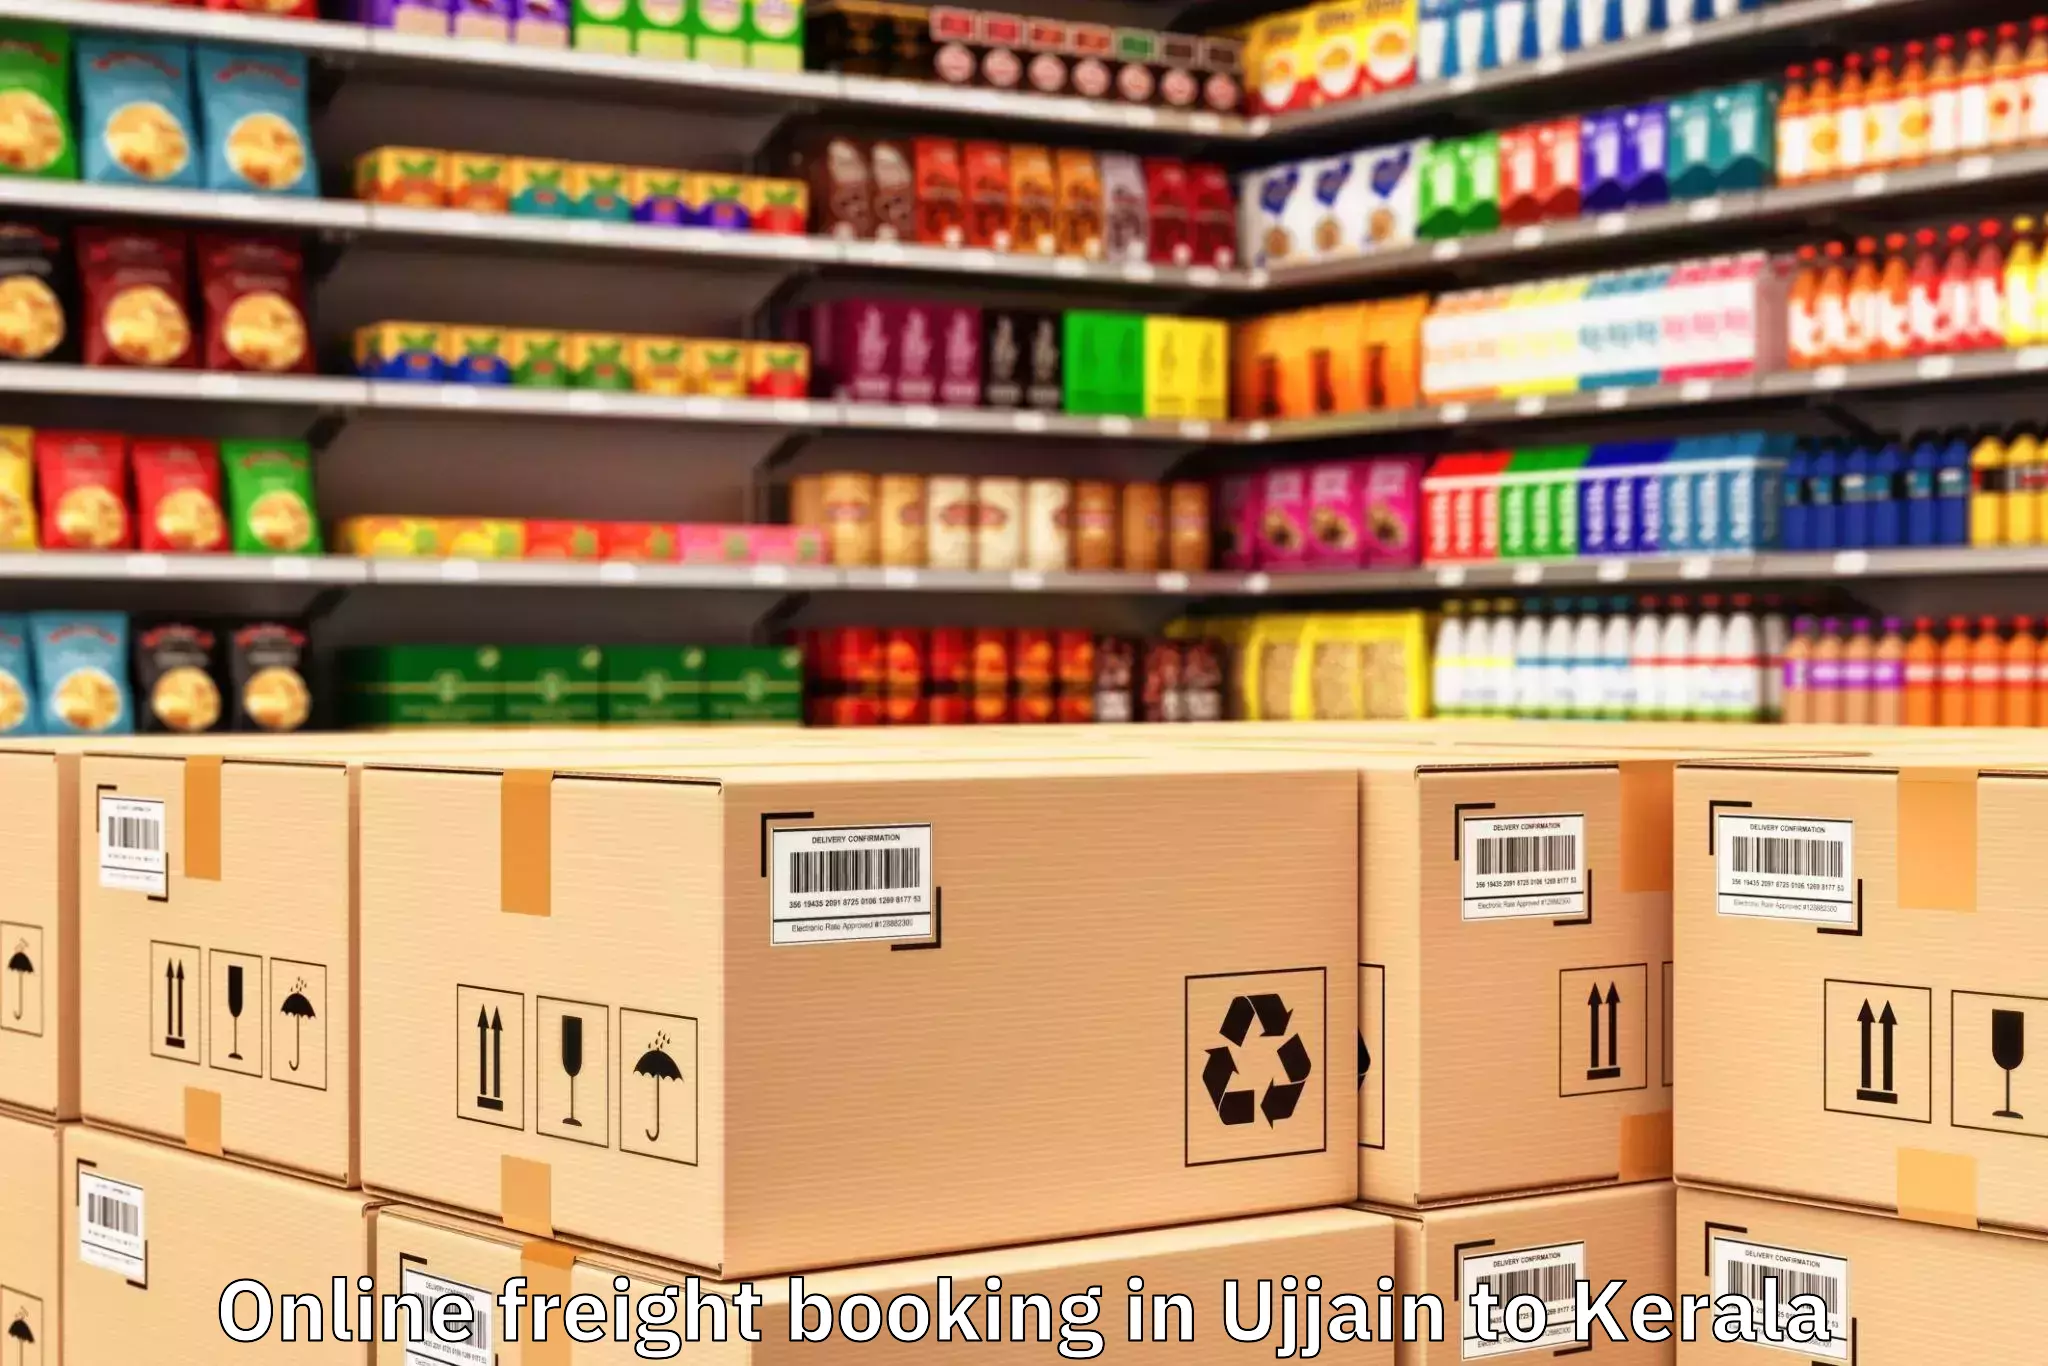 Quality Ujjain to Ernakulam Online Freight Booking